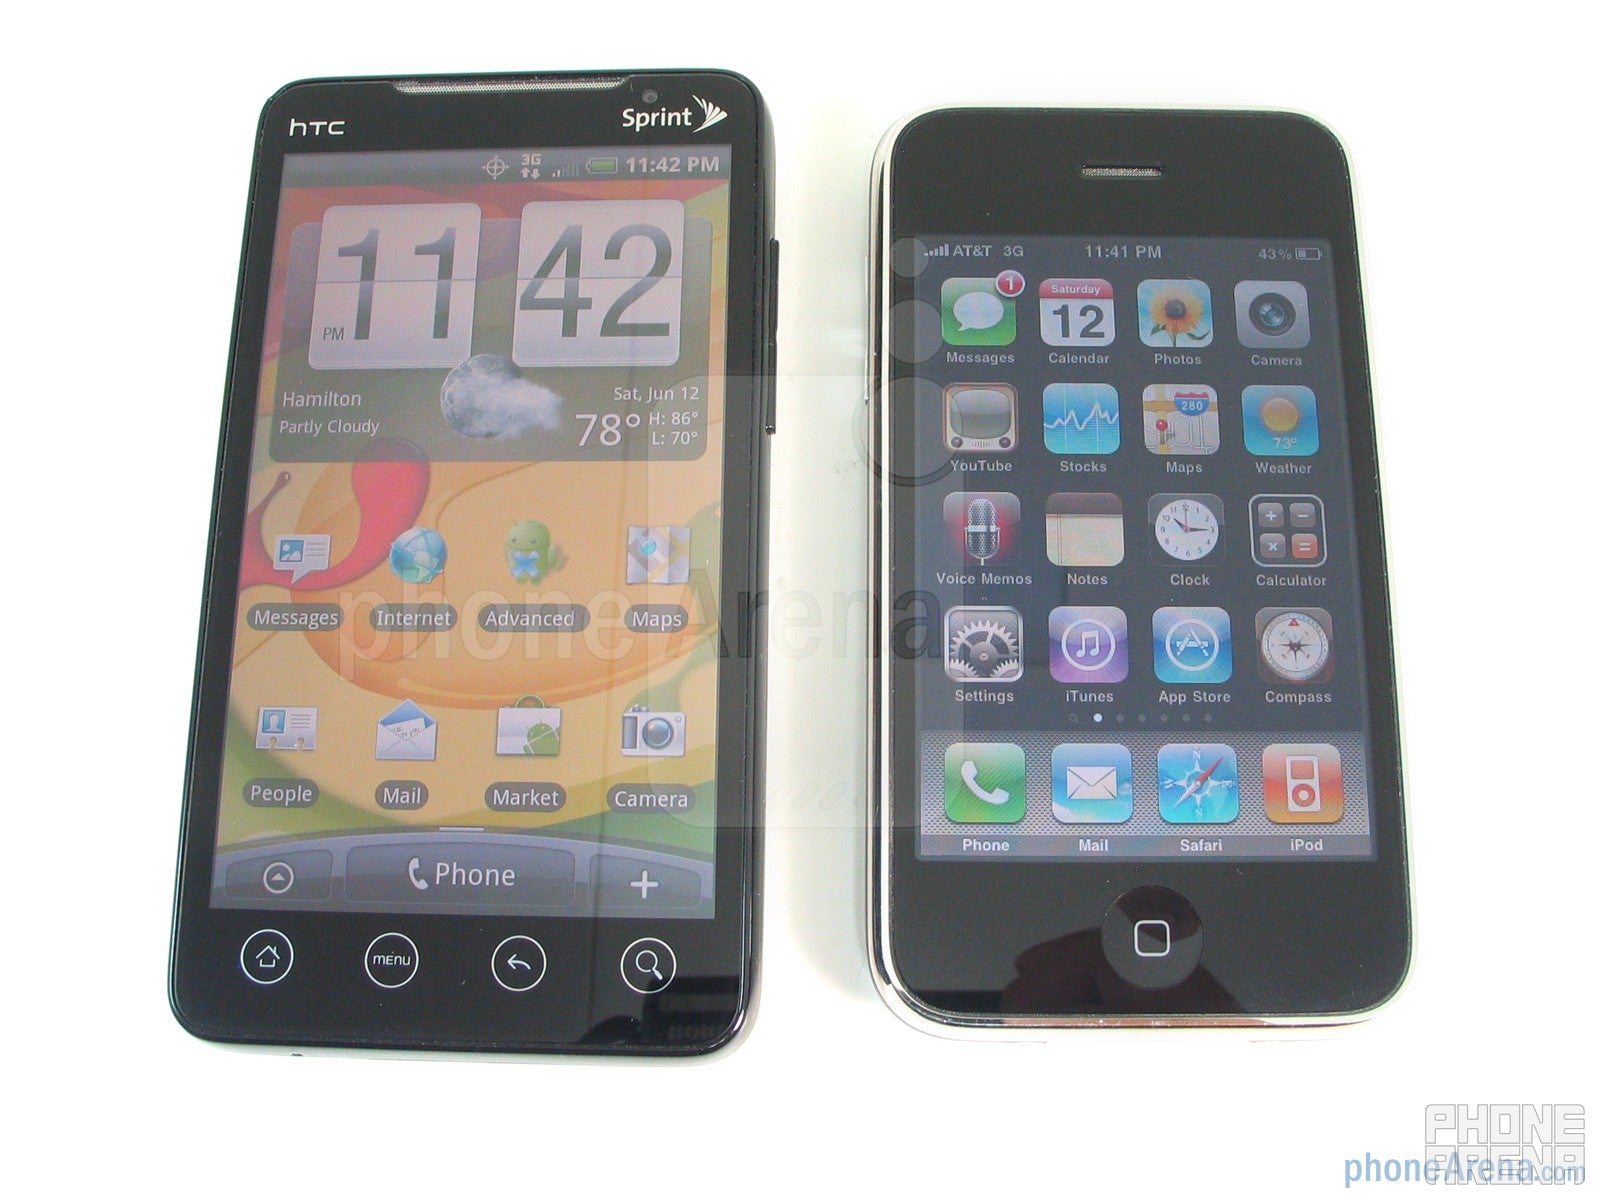 Apple iPhone 3GS and HTC EVO 4G: side by side